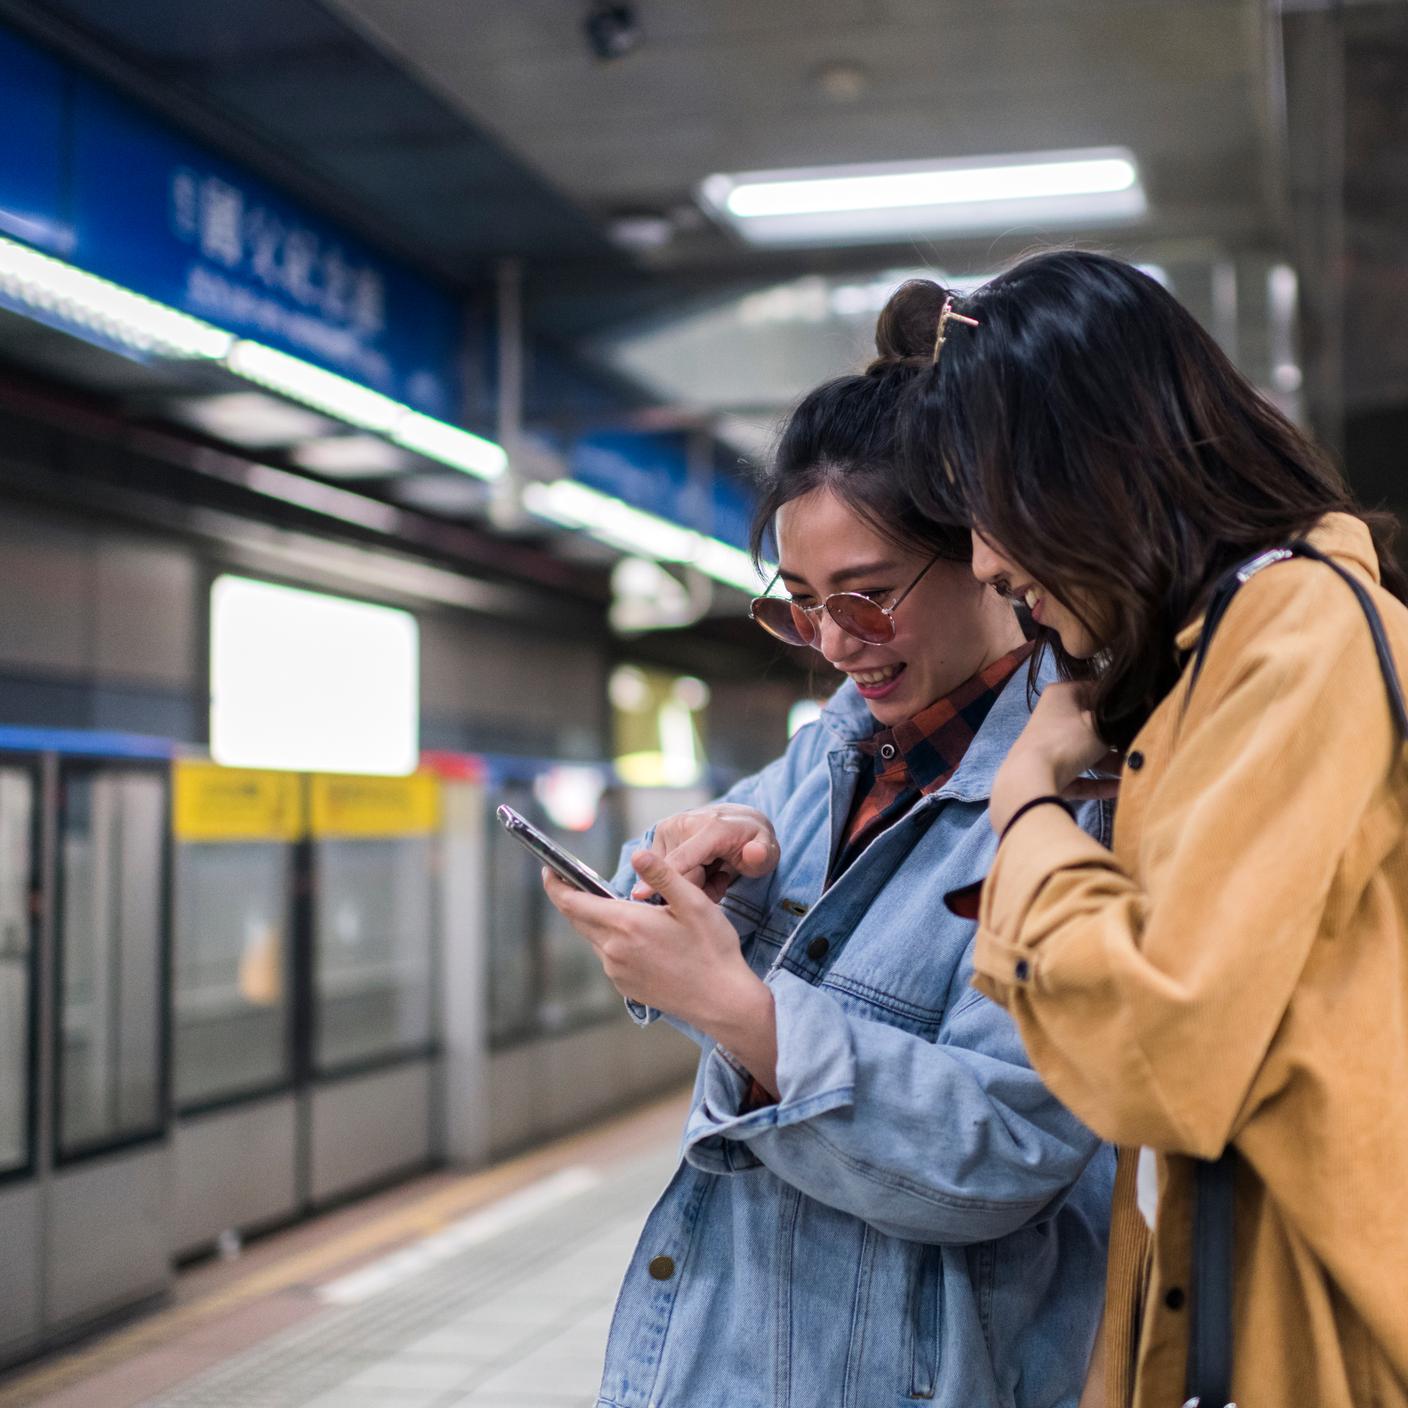 Women planning their travel on mobile phone, waiting on the subway station.